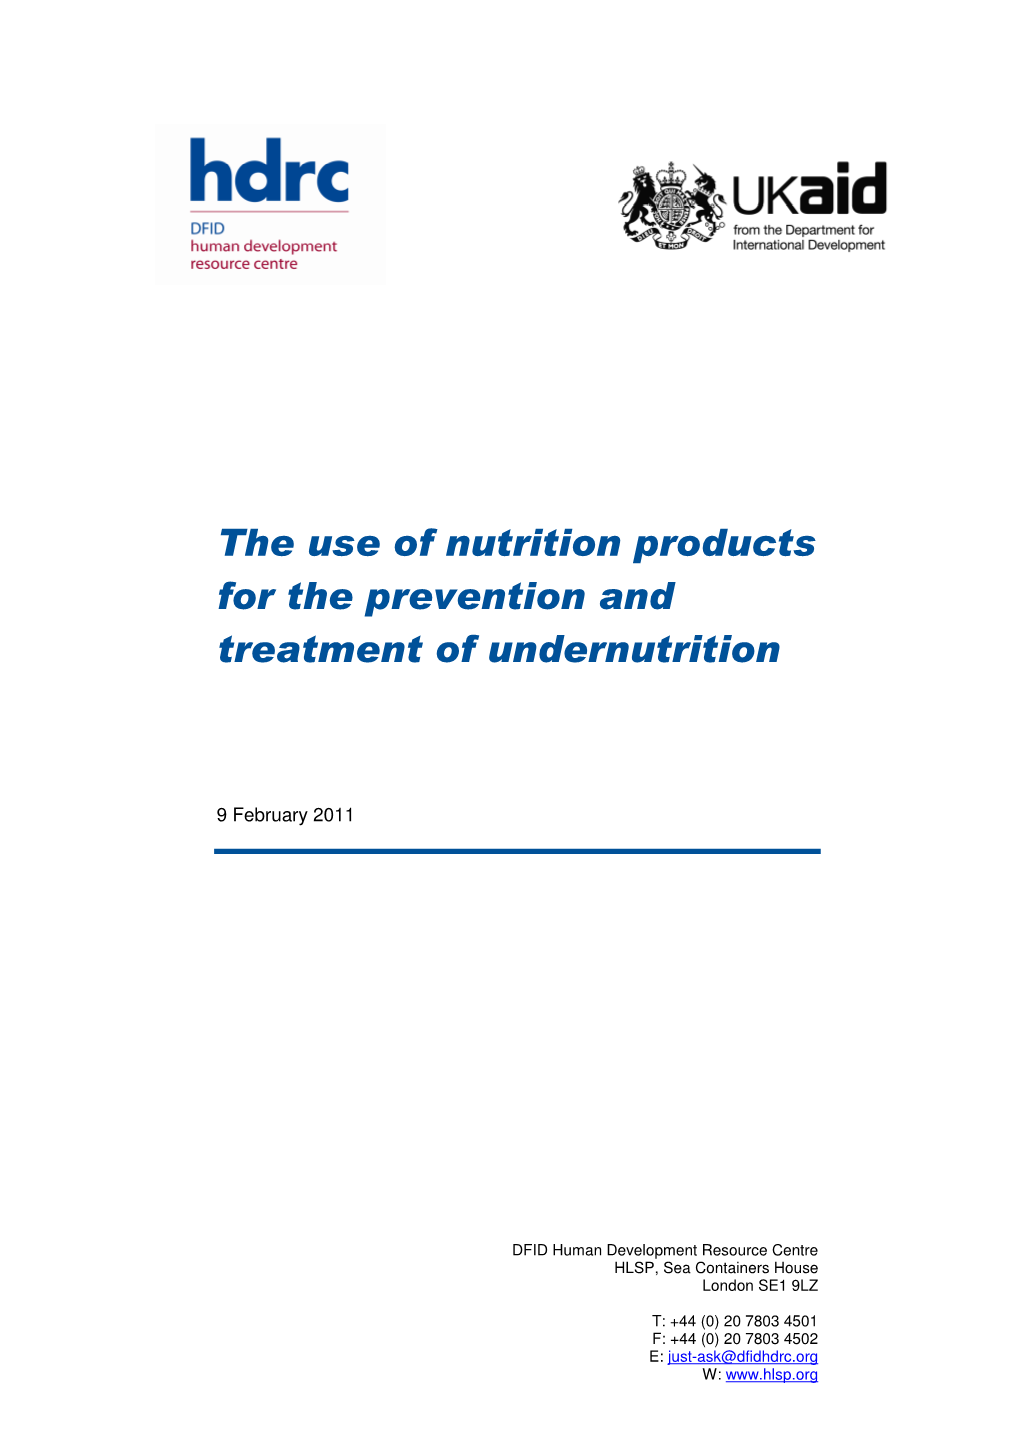 The Use of Nutrition Products for the Prevention and Treatment of Undernutrition